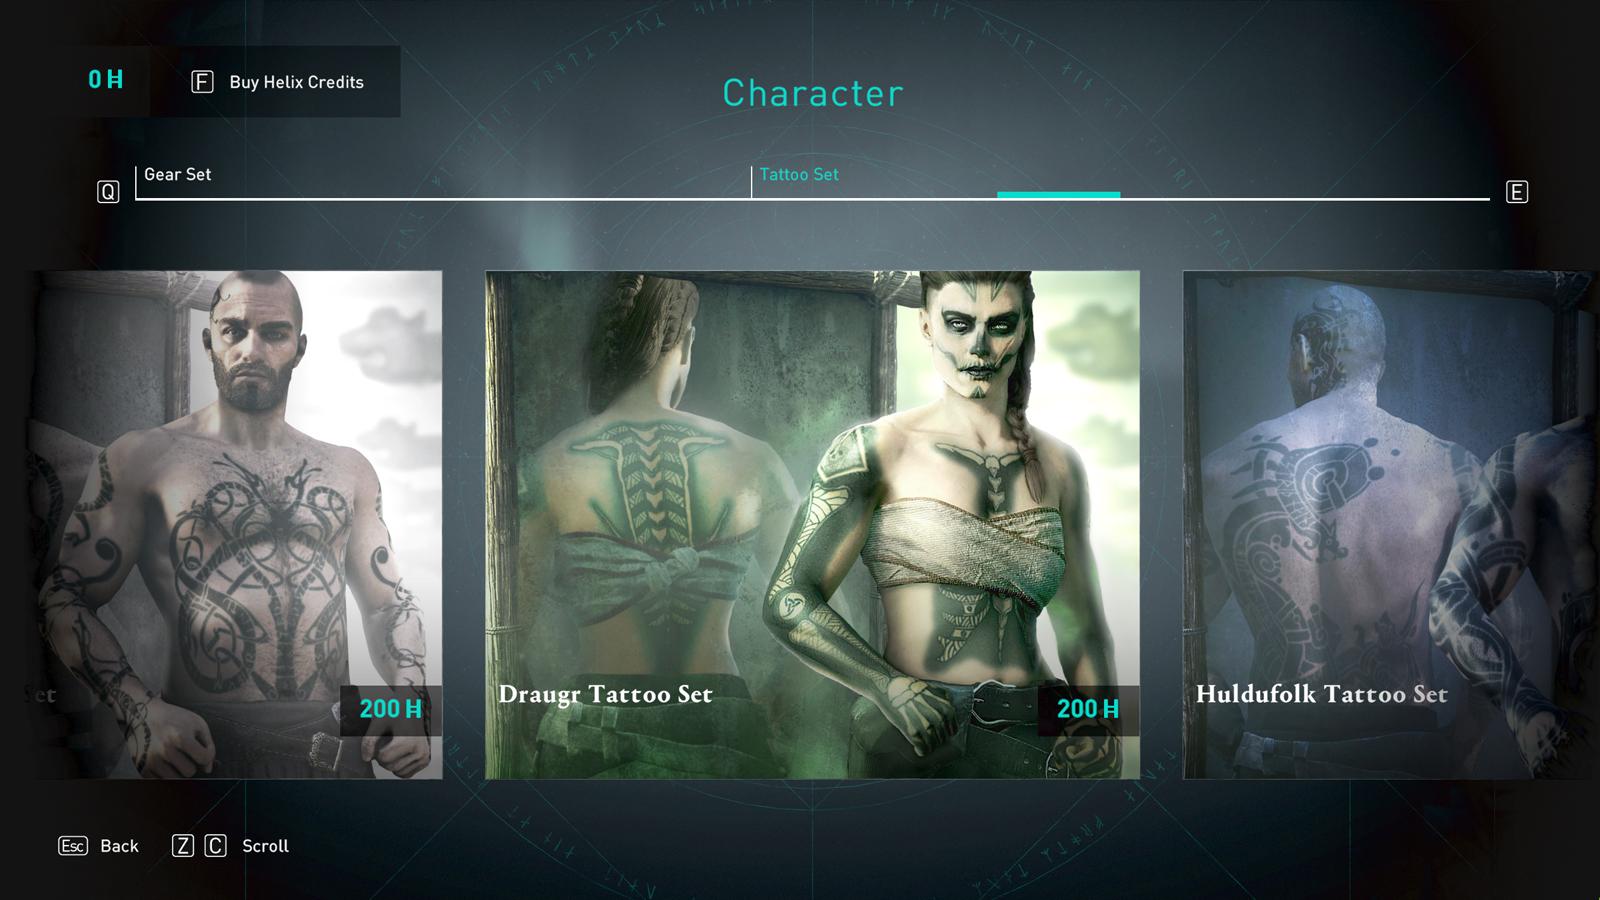 Store image showing the Draugr Tattoo set